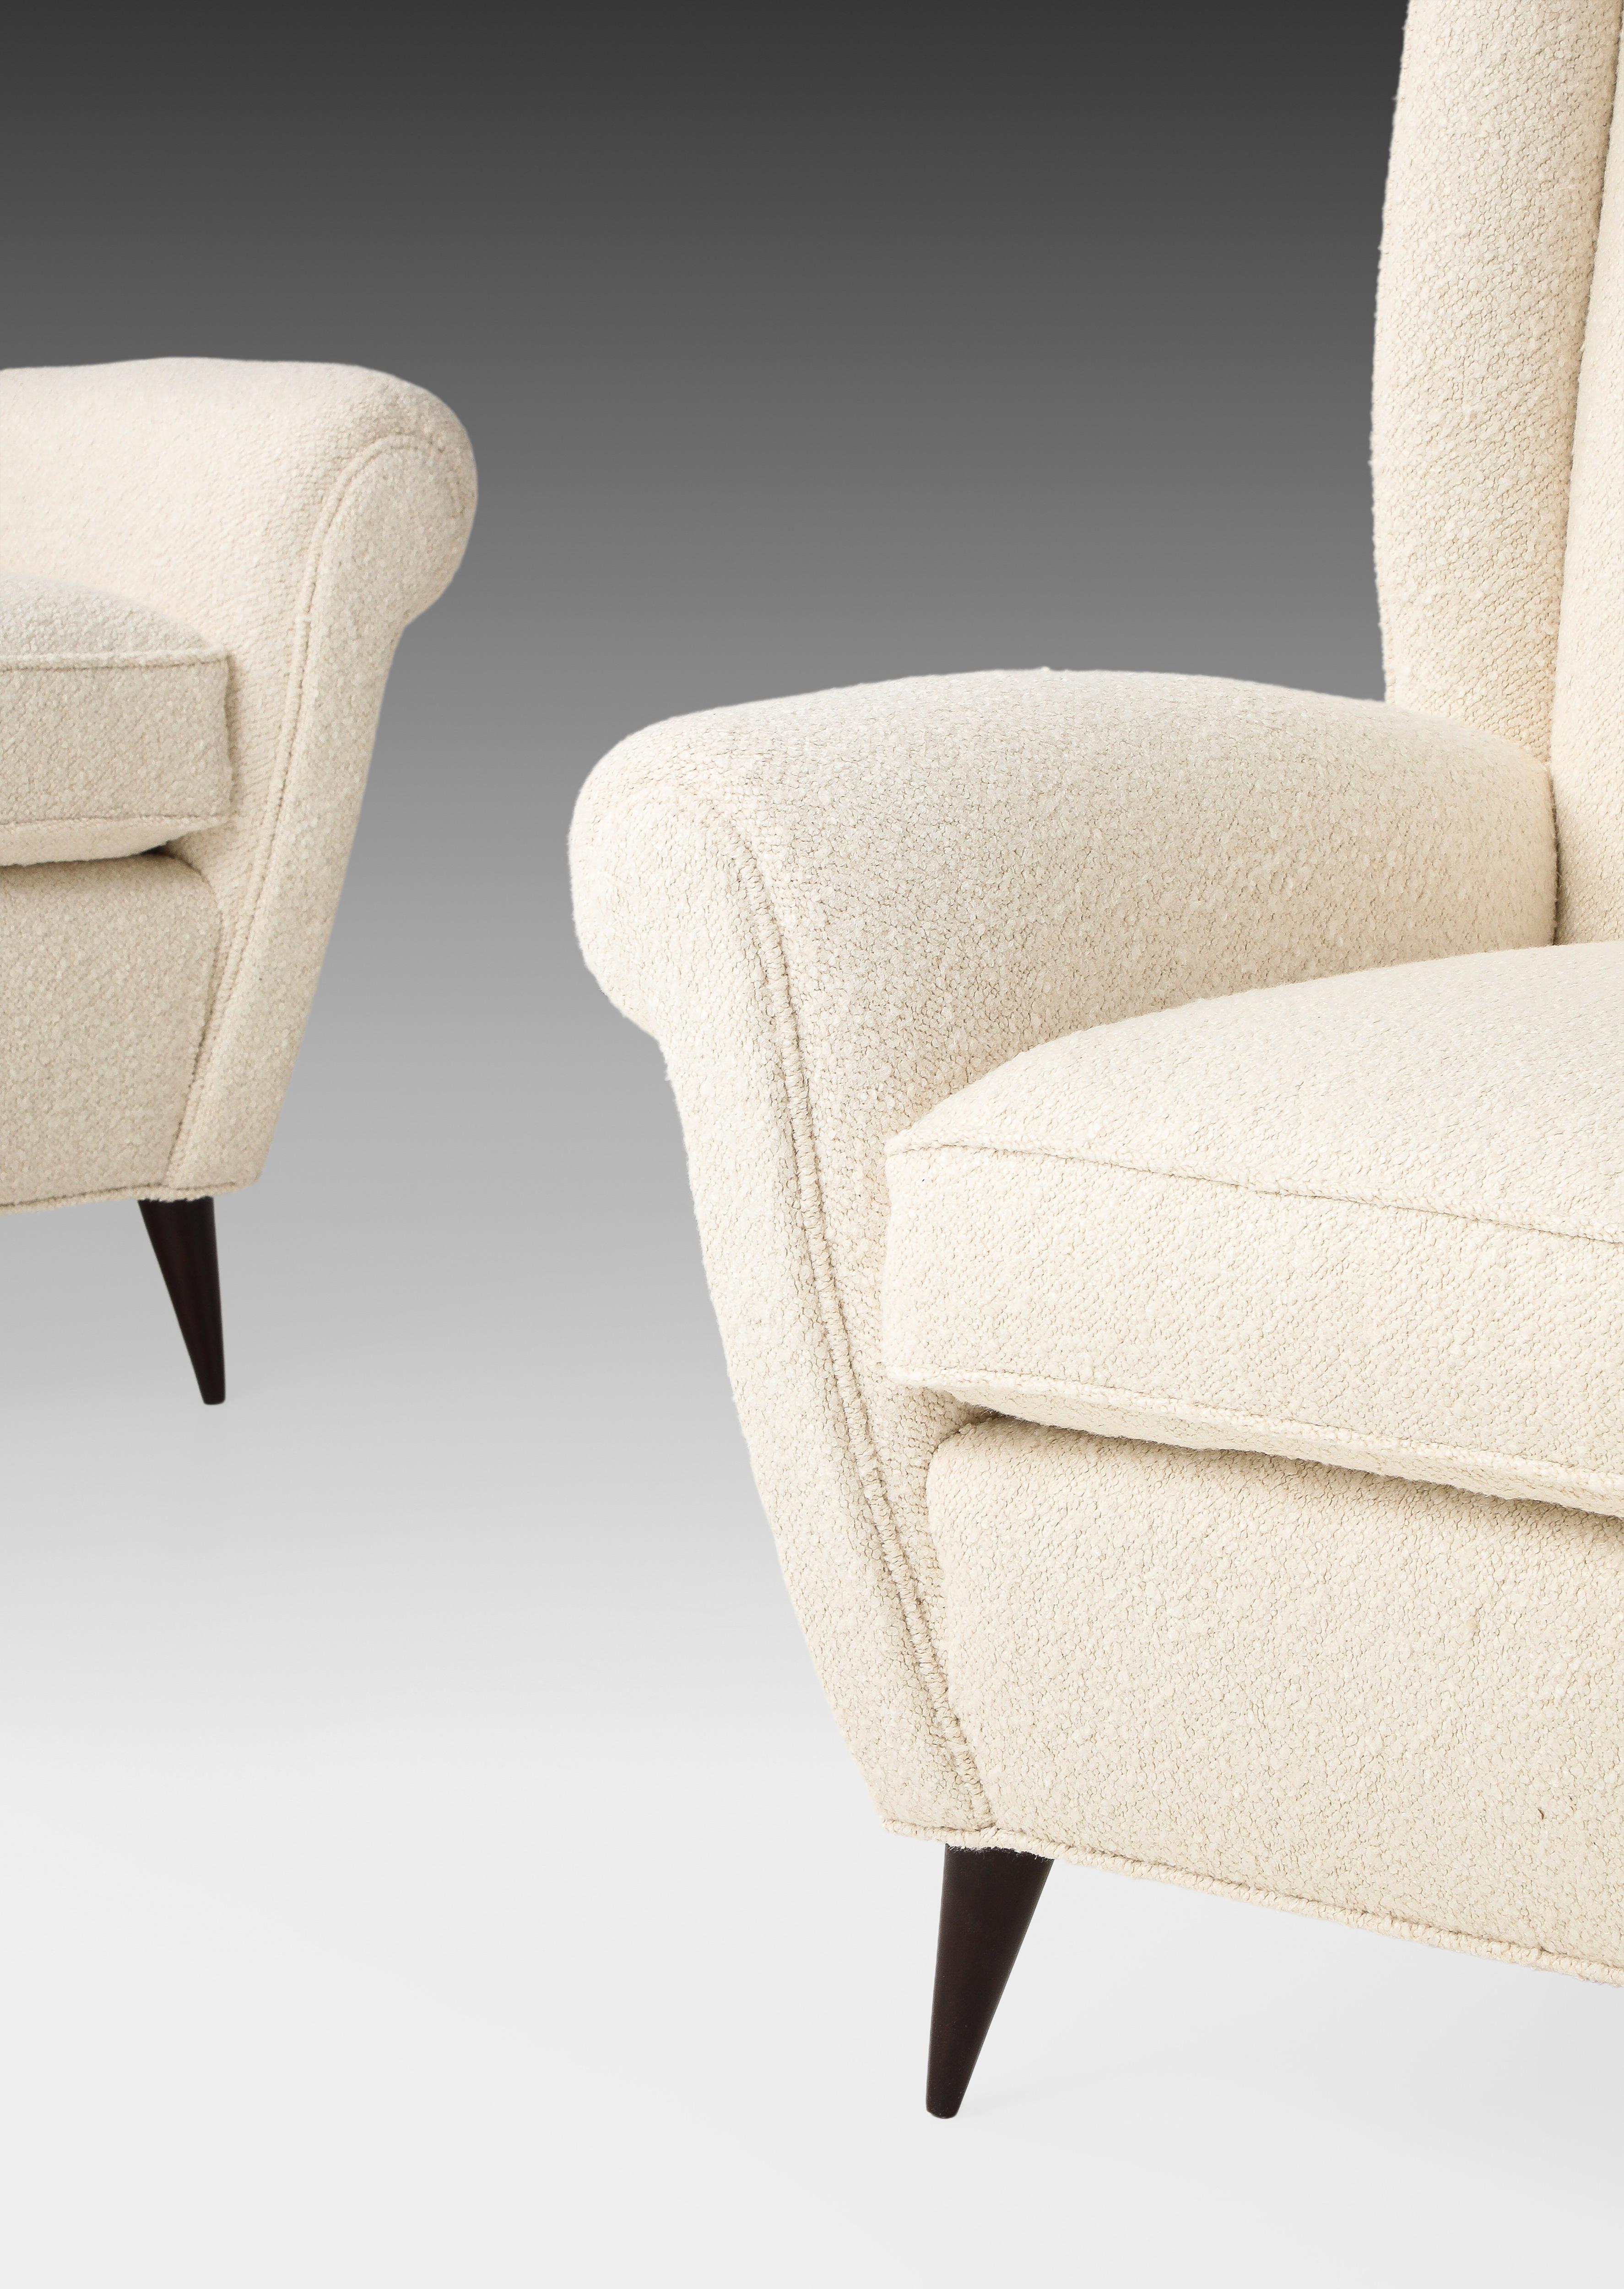 Gio Ponti Pair of High Back Armchairs in Ivory Bouclé, 1950s For Sale 3